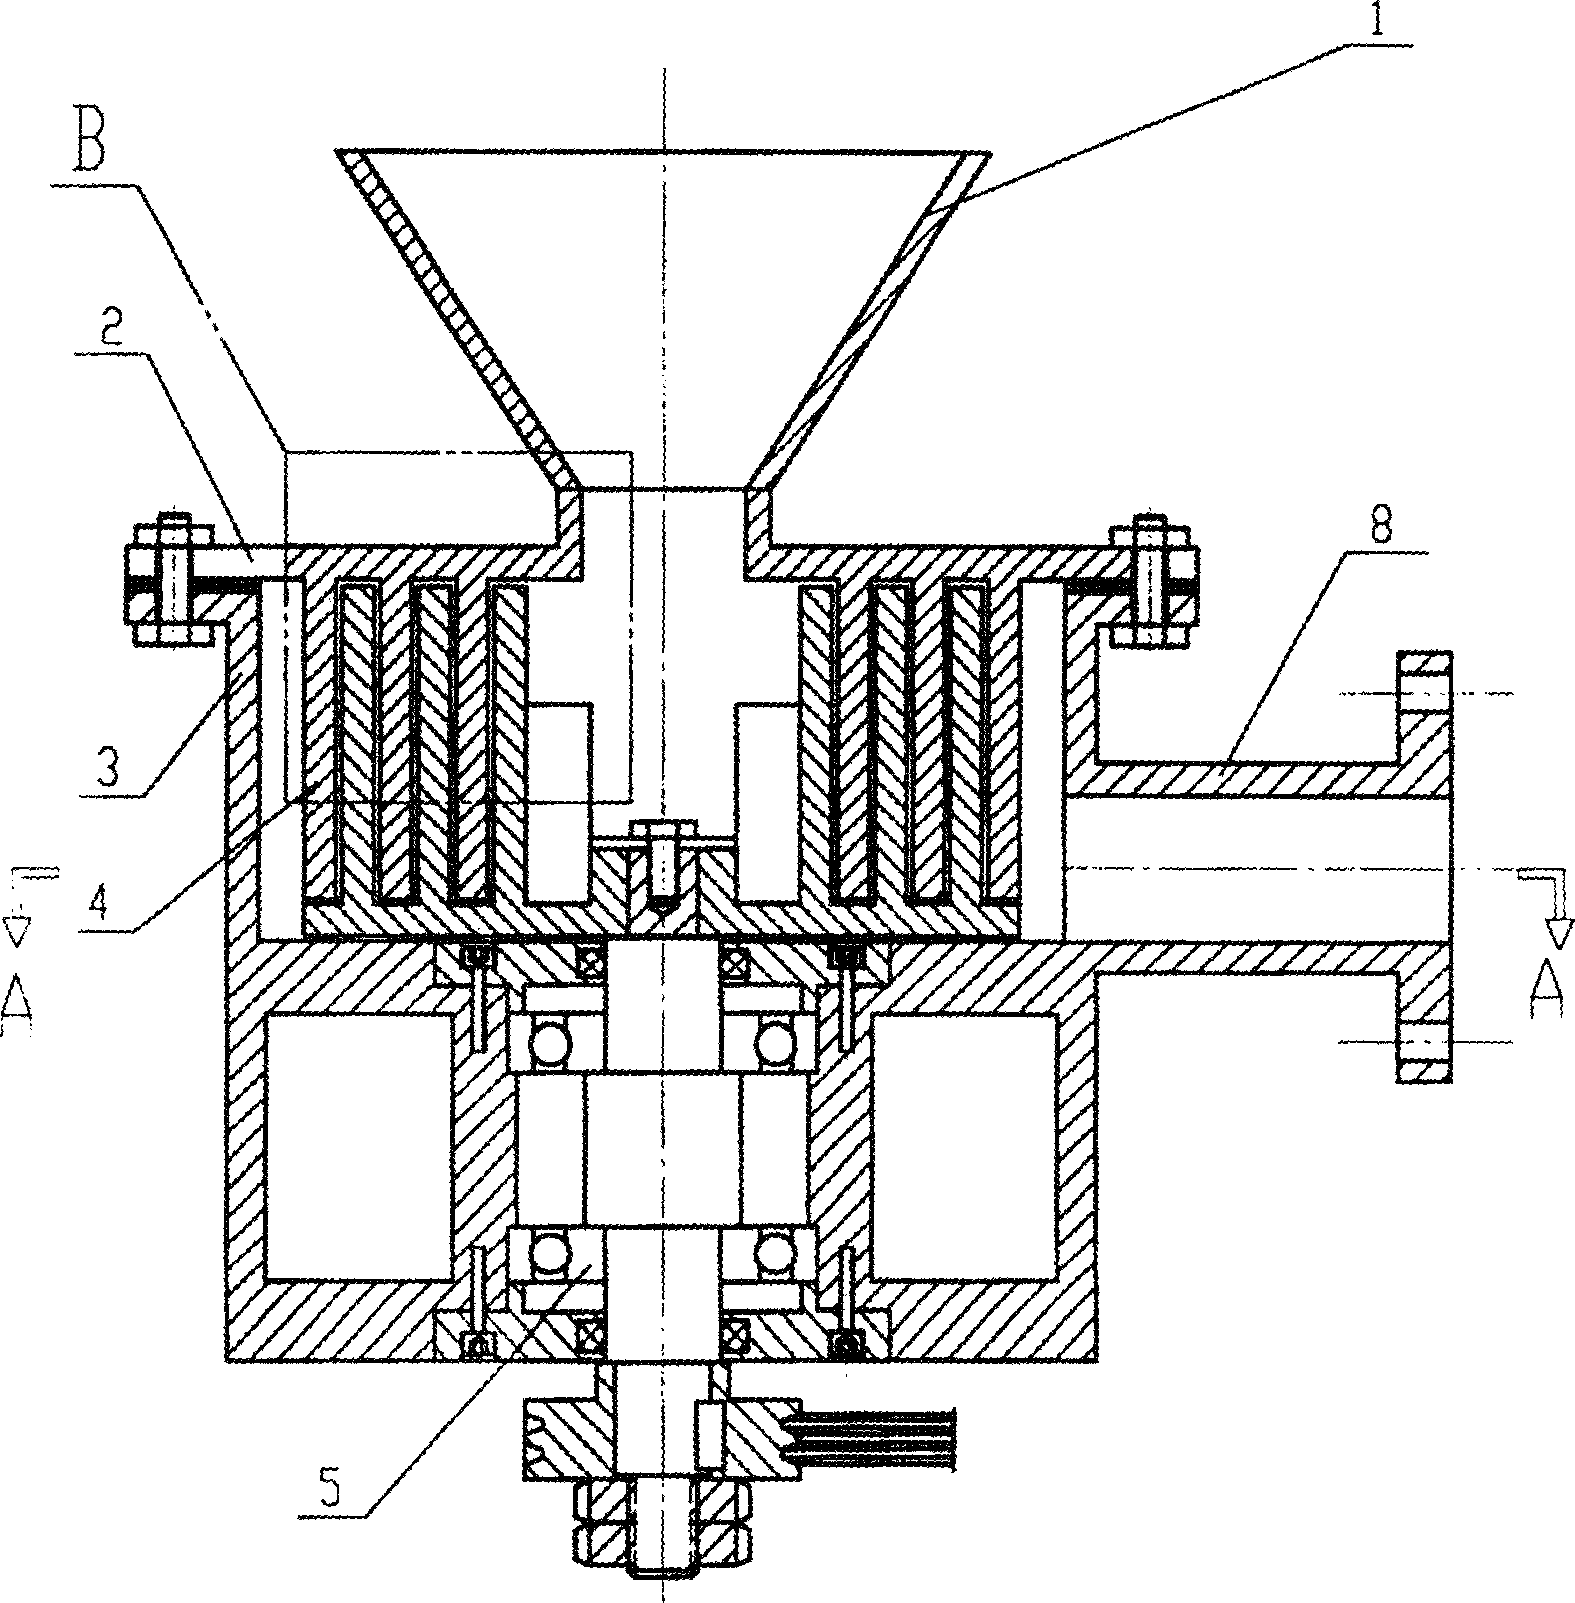 Fluid continuous mixing device